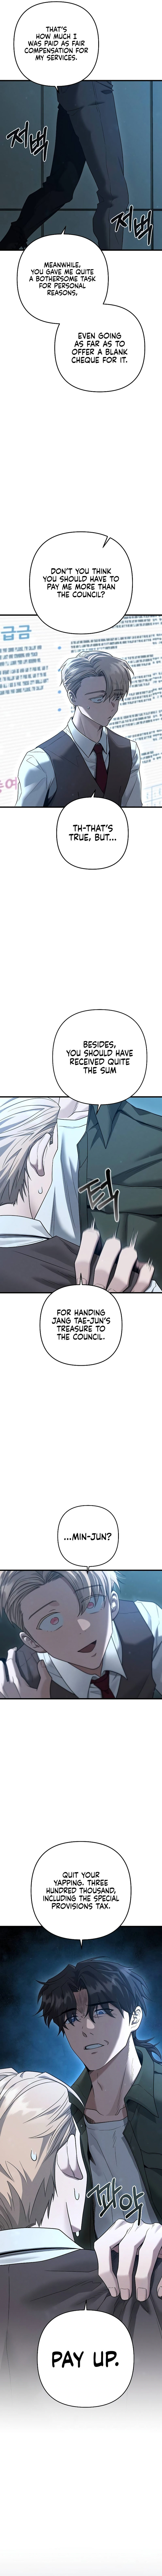 foreigner-on-the-periphery-chap-35-5